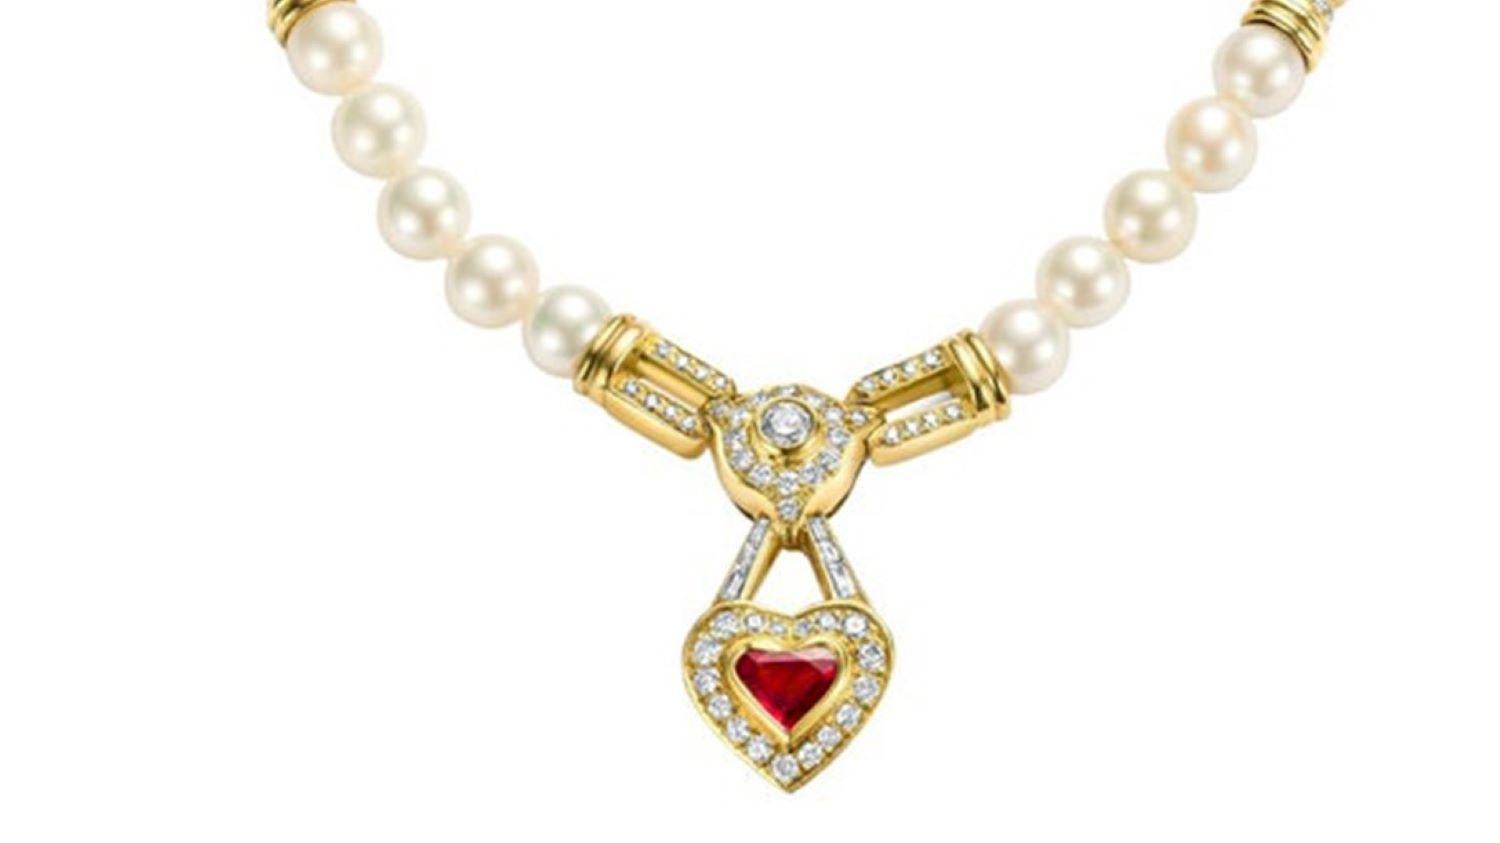 Gorgeous 18 kt. Yellow gold Pearl Necklace with Diamonds & Heart Shaped Red Ruby

Pearls: 38 Akoya pearls, diameter each pearl 8 mm

Ruby: Heart shape ruby, 
18 Square cut ruby

Diamonds: brilliant cut diamonds together 2.15 ct.
baguette cut